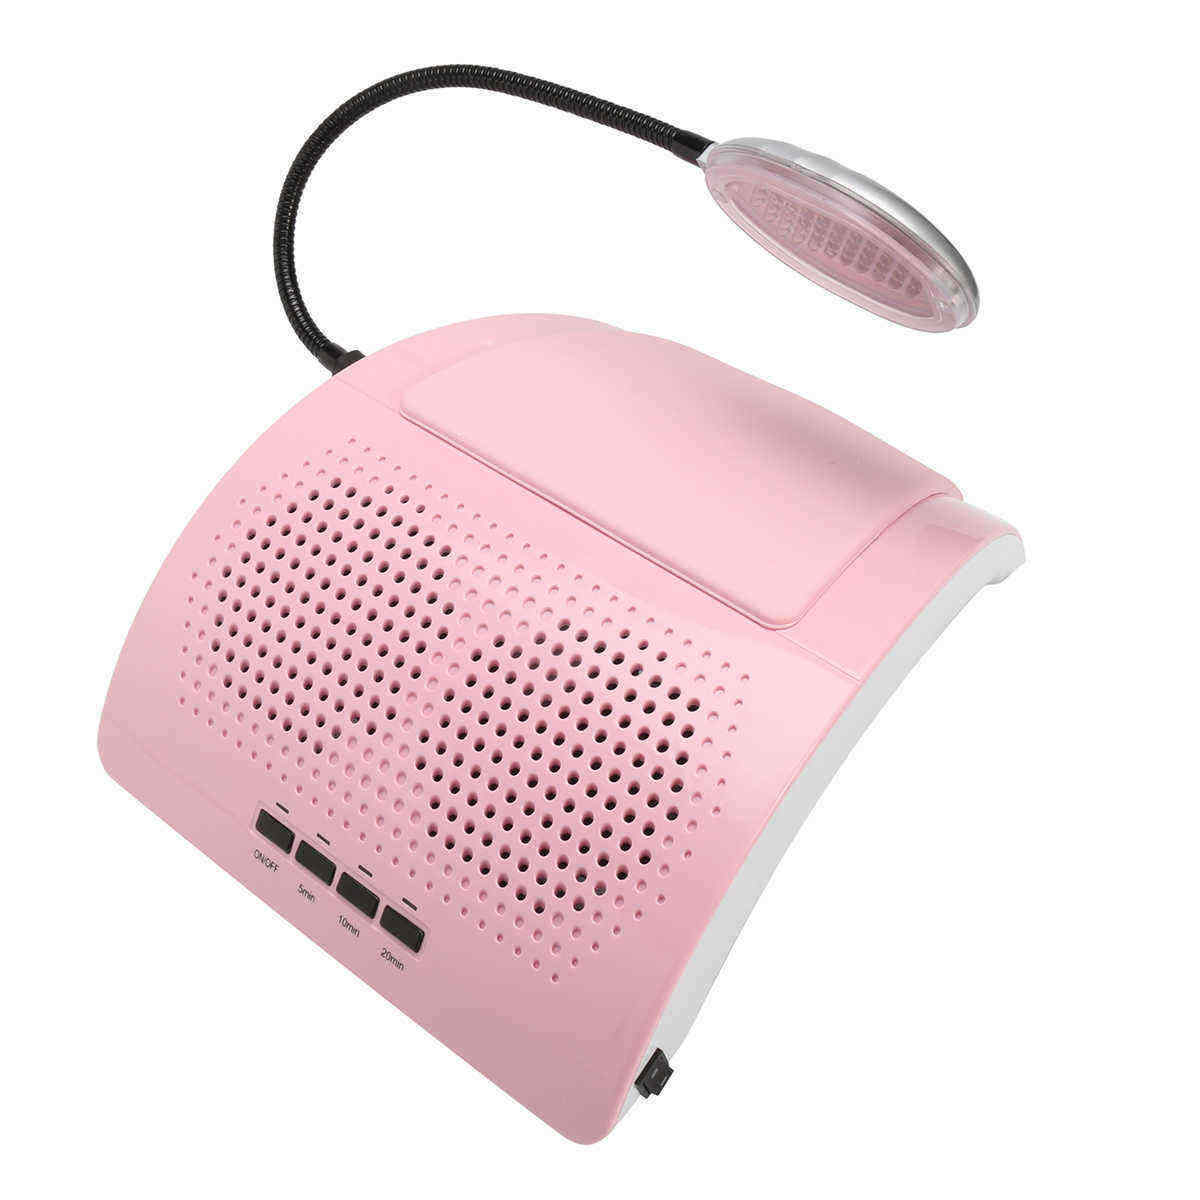 100-240V-60W-Salon-Suction-Dust-Collector-Machine-Vacuum-Cleaner-Tools-Nail-Art-Manicure-1204182